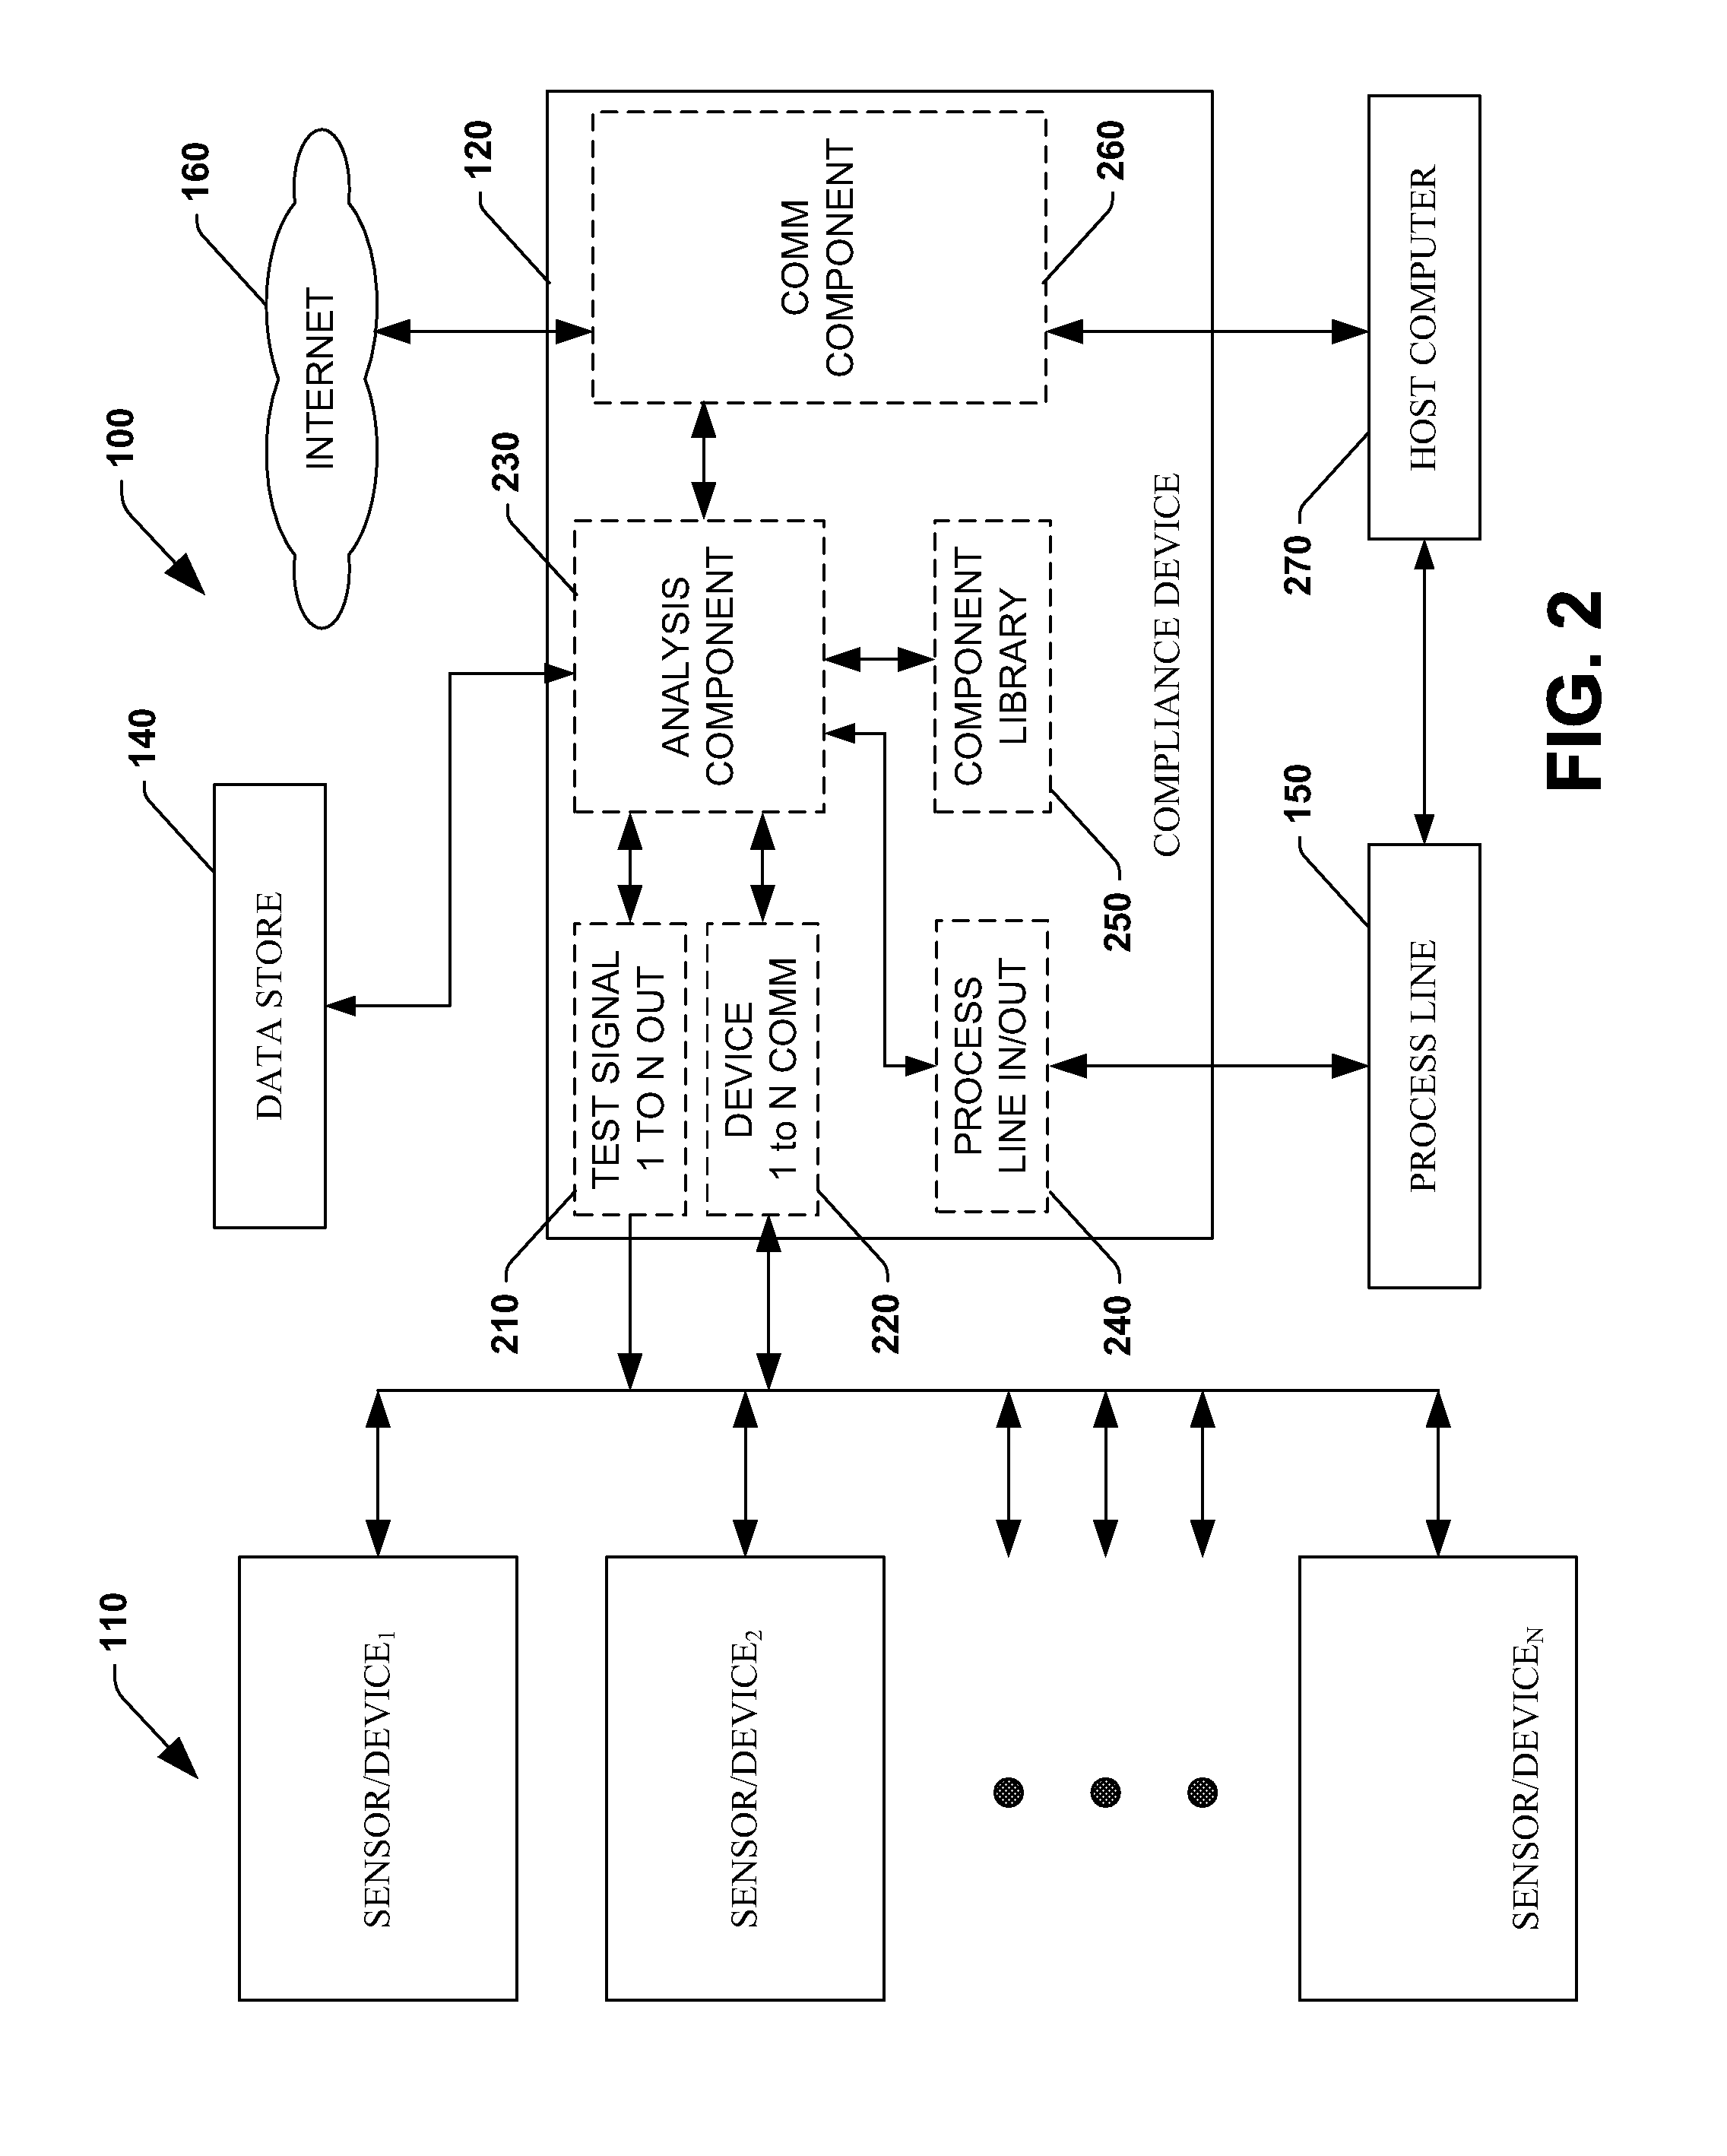 Self sensing component interface system